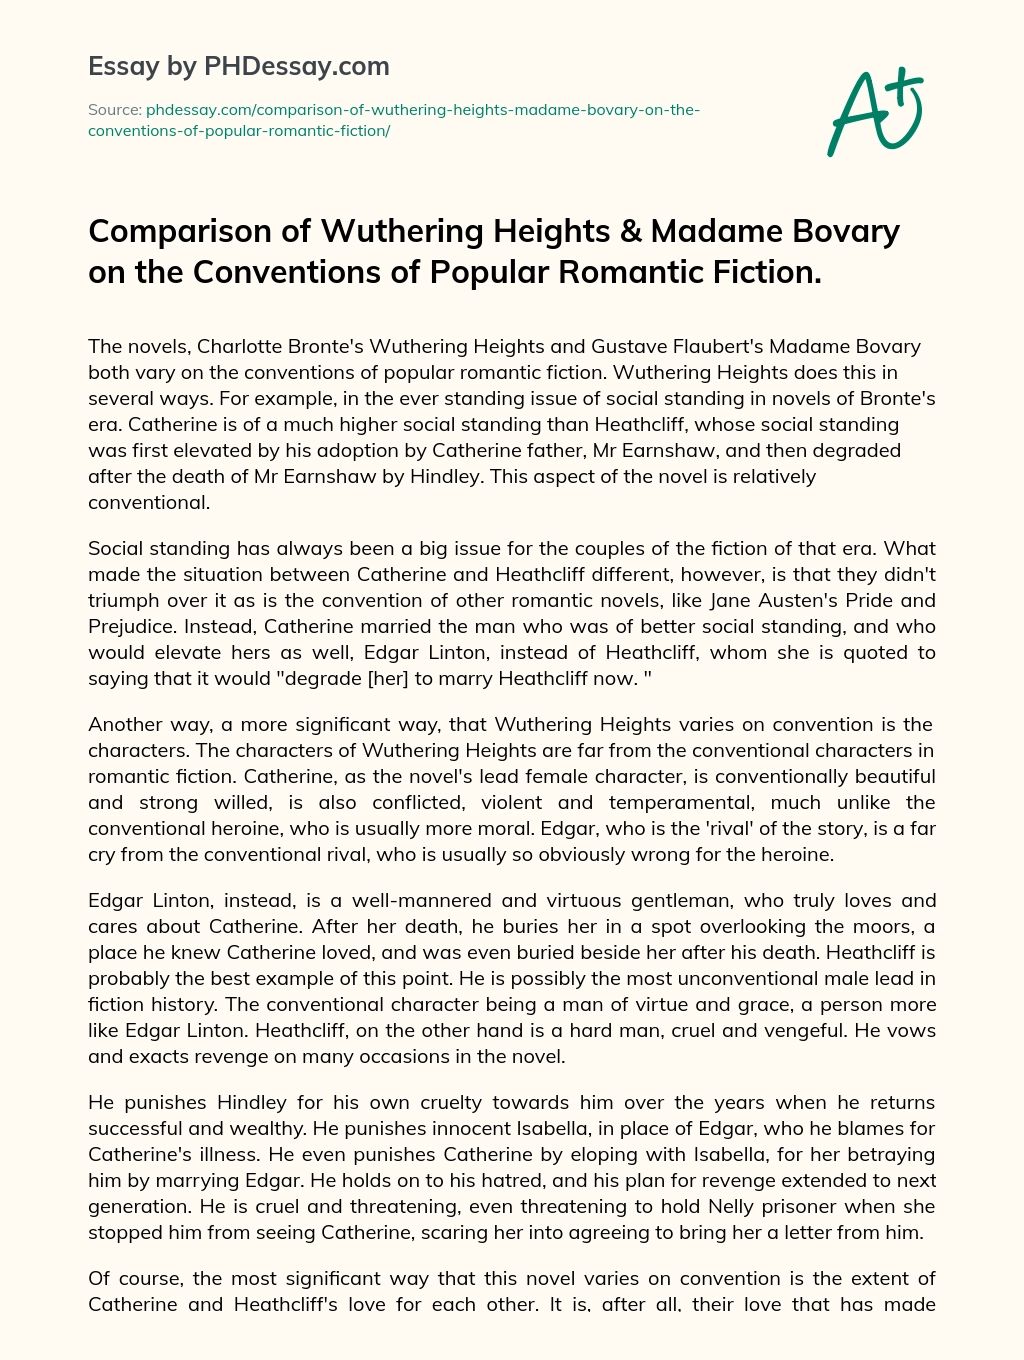 Comparison of Wuthering Heights & Madame Bovary on the Conventions of Popular Romantic Fiction. essay